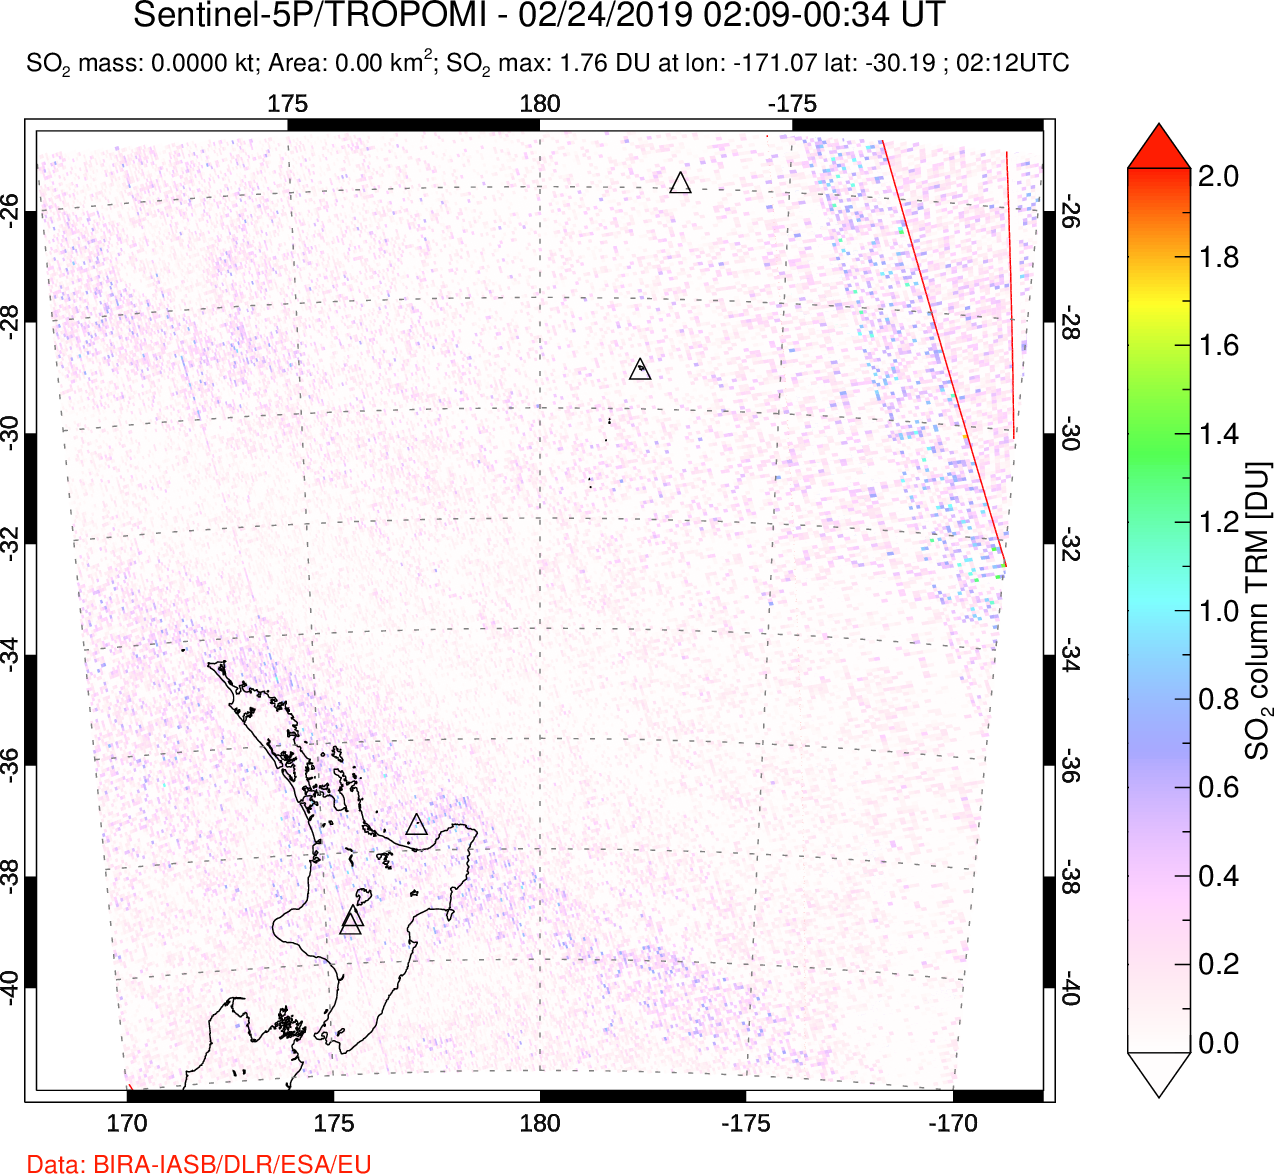 A sulfur dioxide image over New Zealand on Feb 24, 2019.